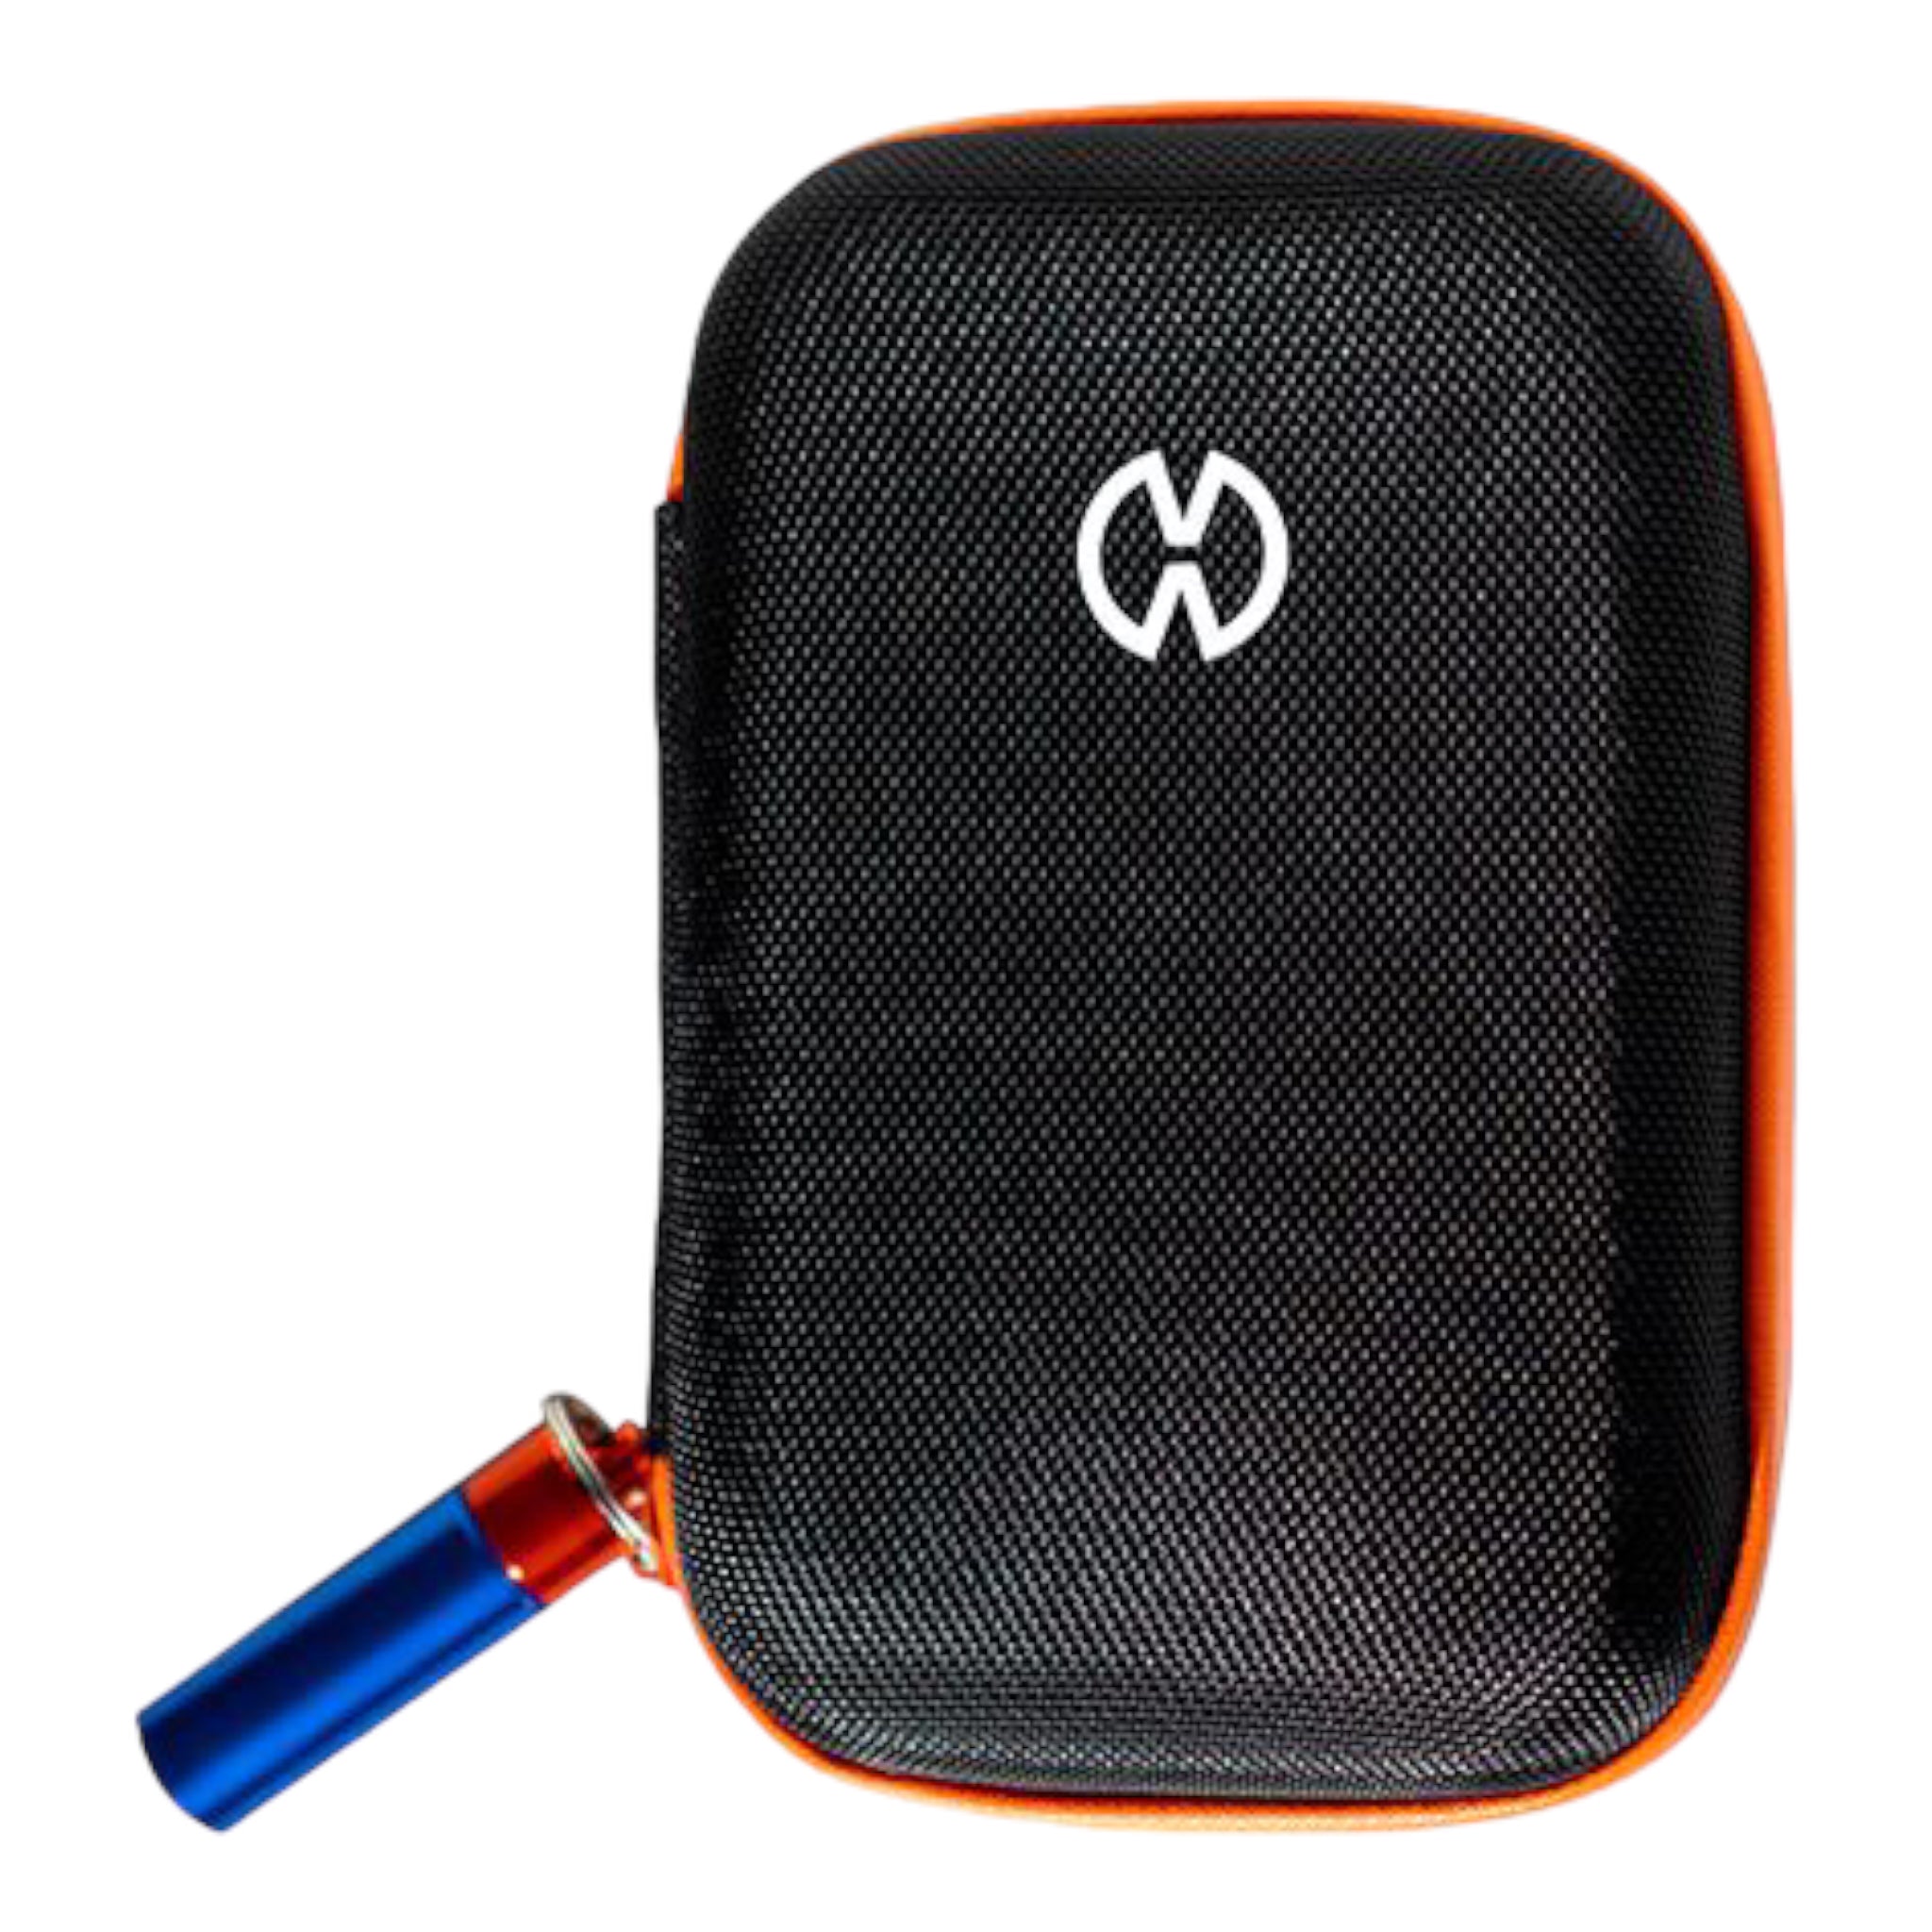 selection of Vaporizer Accessories for puffco, pax, exxus, hamilton devices, and storz and bickel volcano mighty+